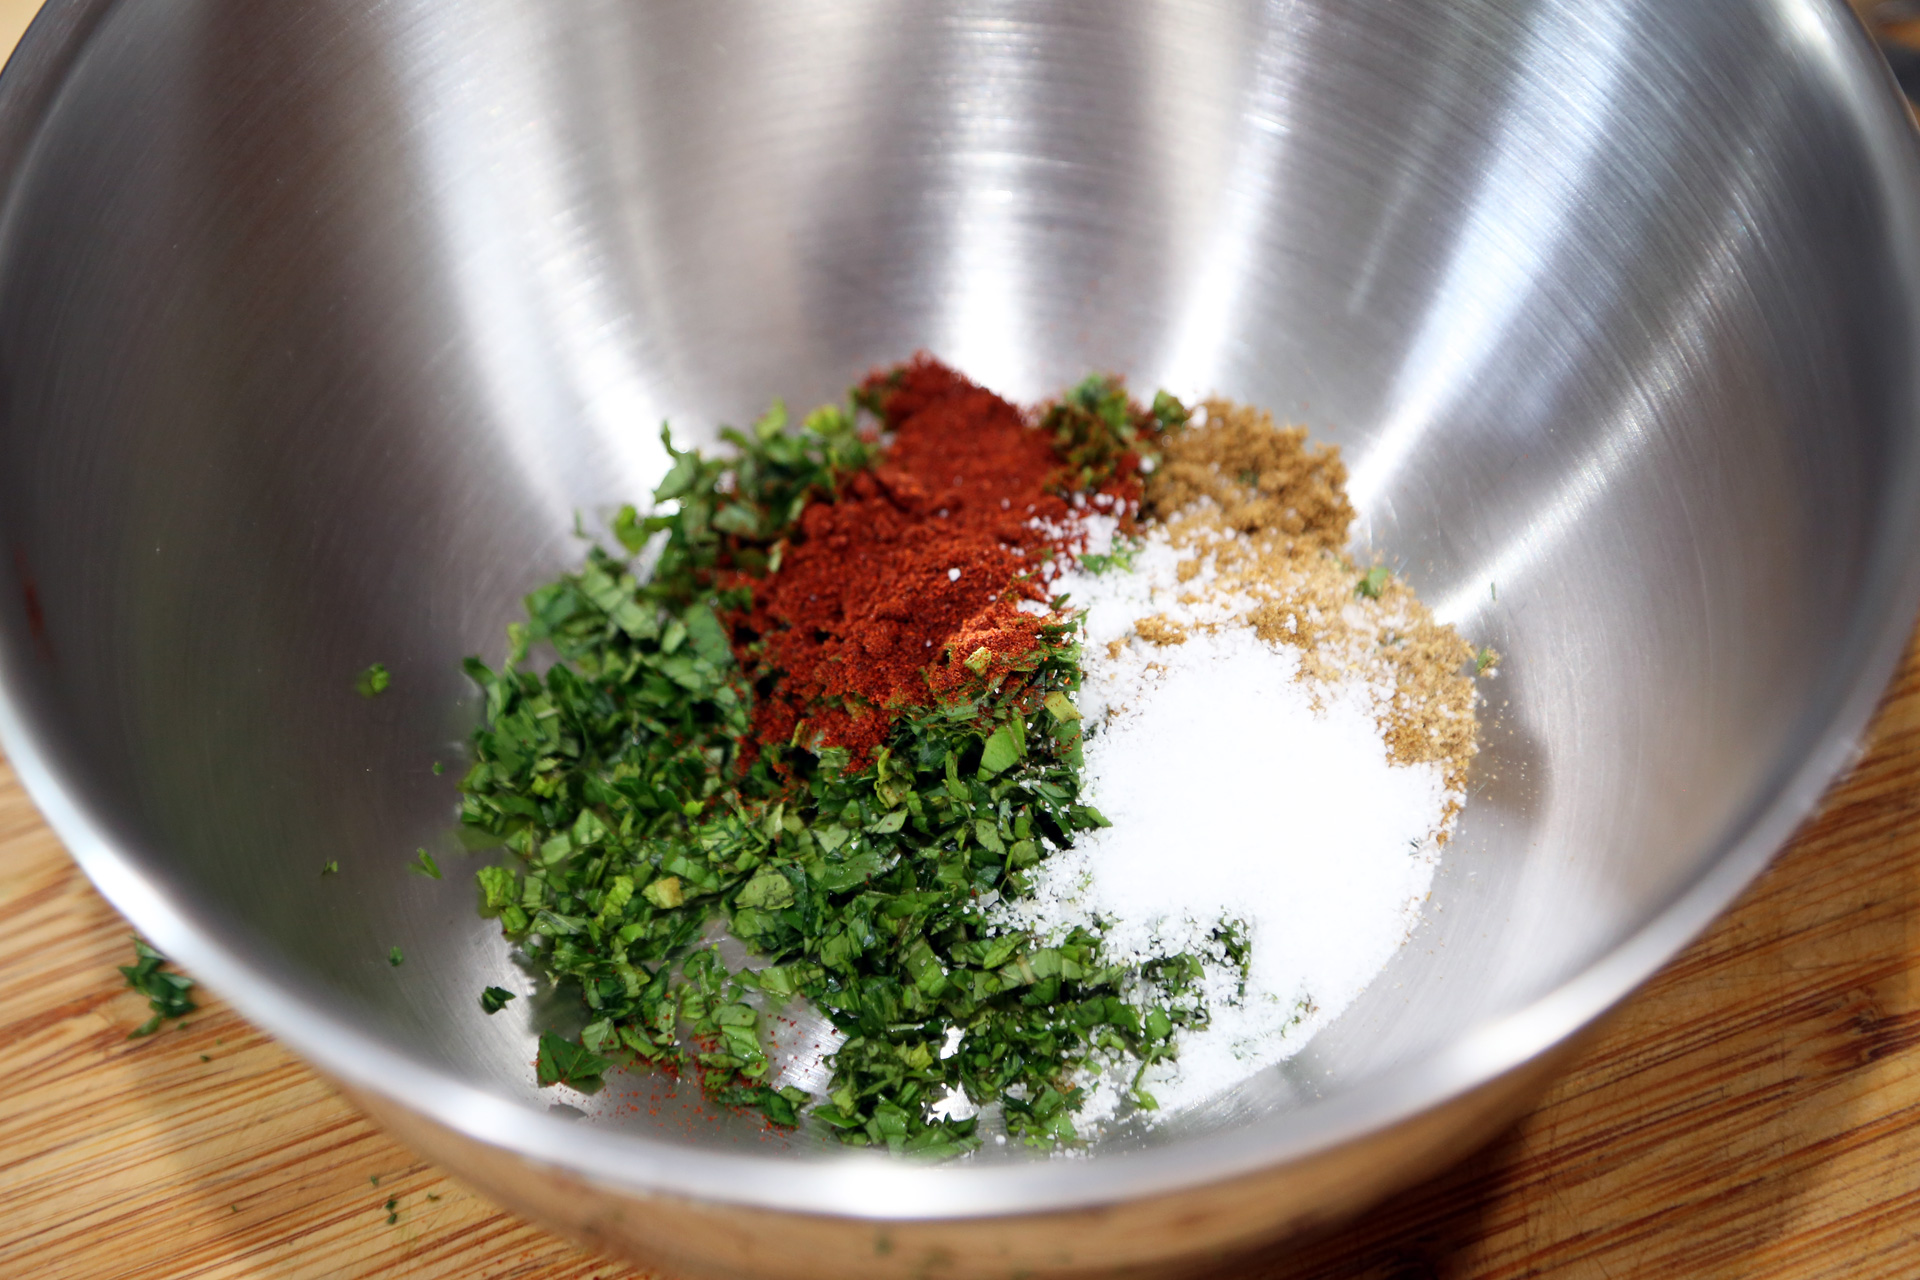 In a bowl, stir together the herbs, spices, salt, and oil.